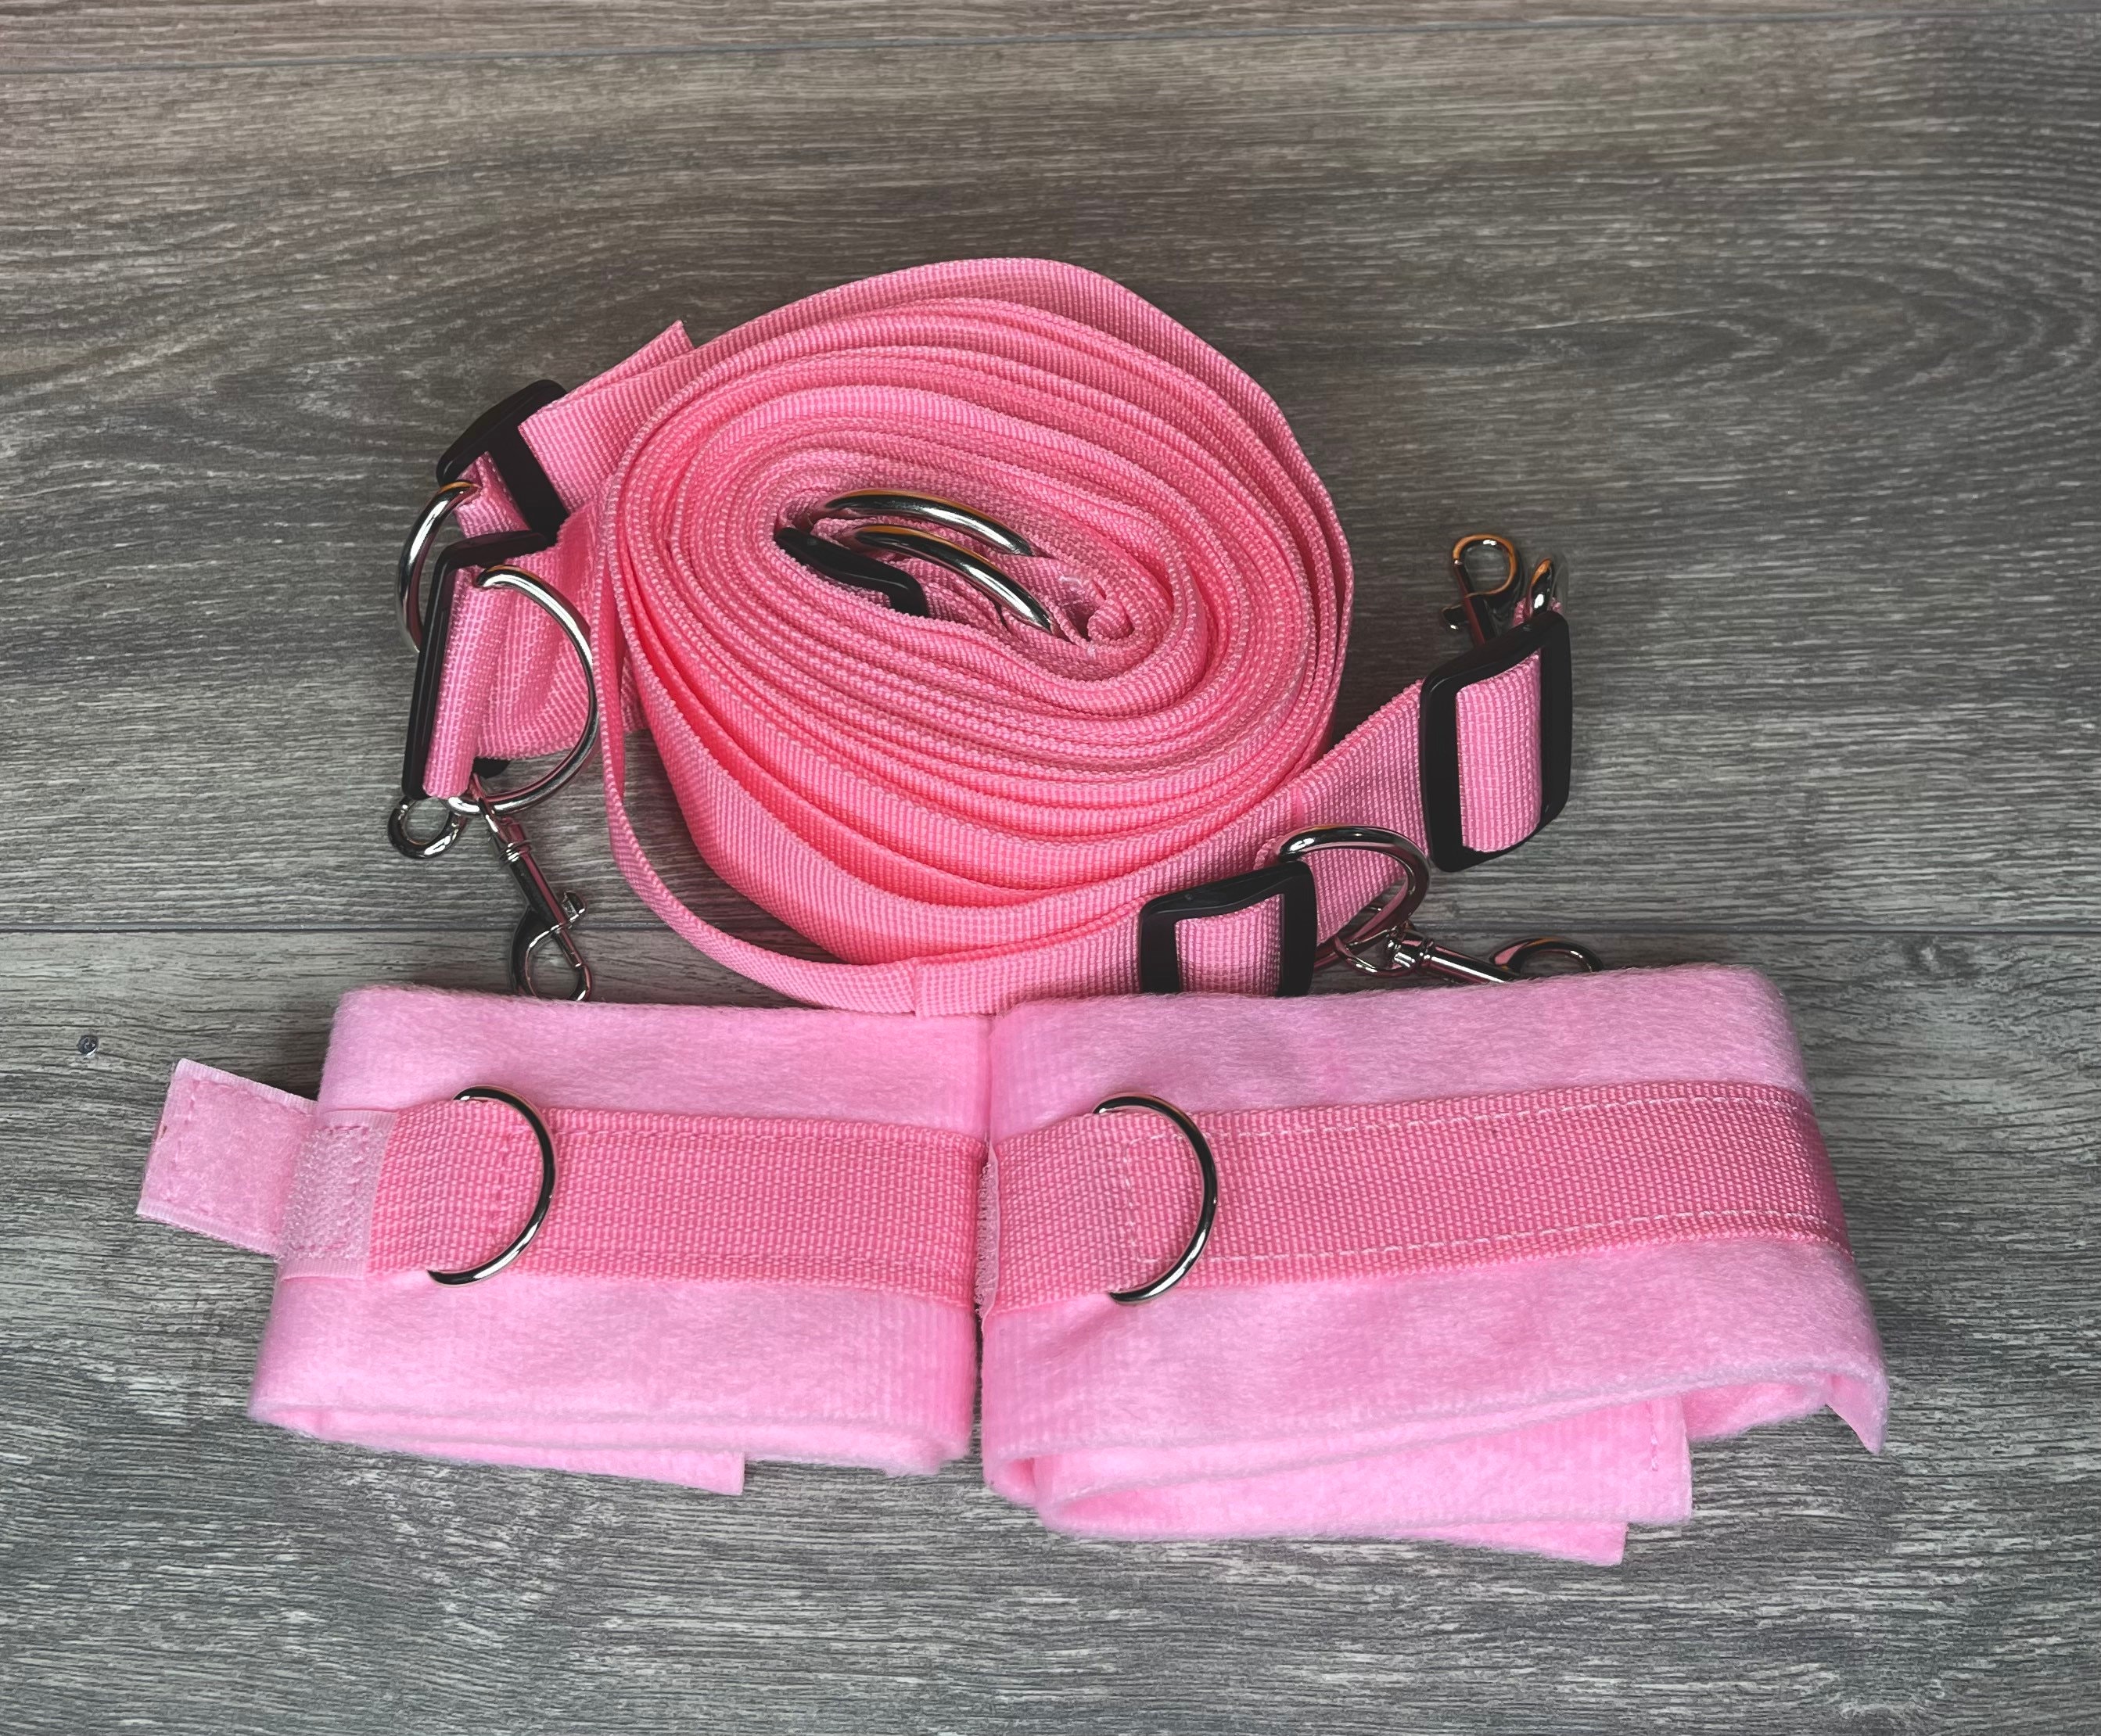 Bed Straps Restraint kit .Fits Almost Any Size Mattress.